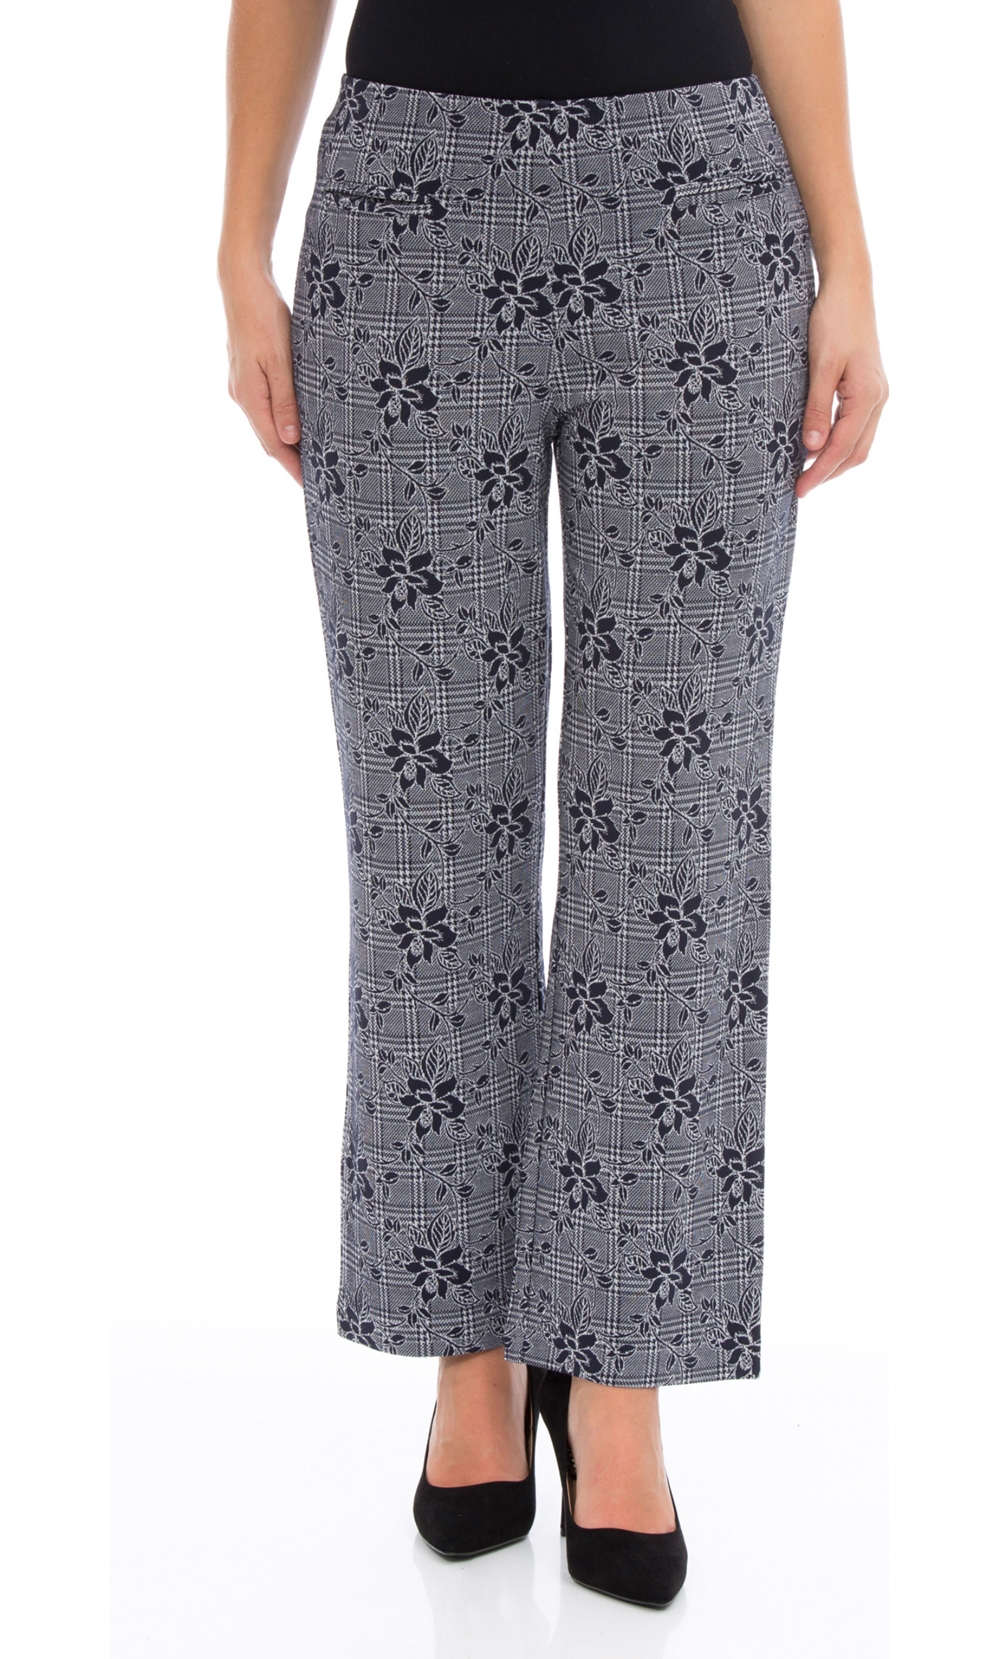 Anna Rose Patterned Trousers